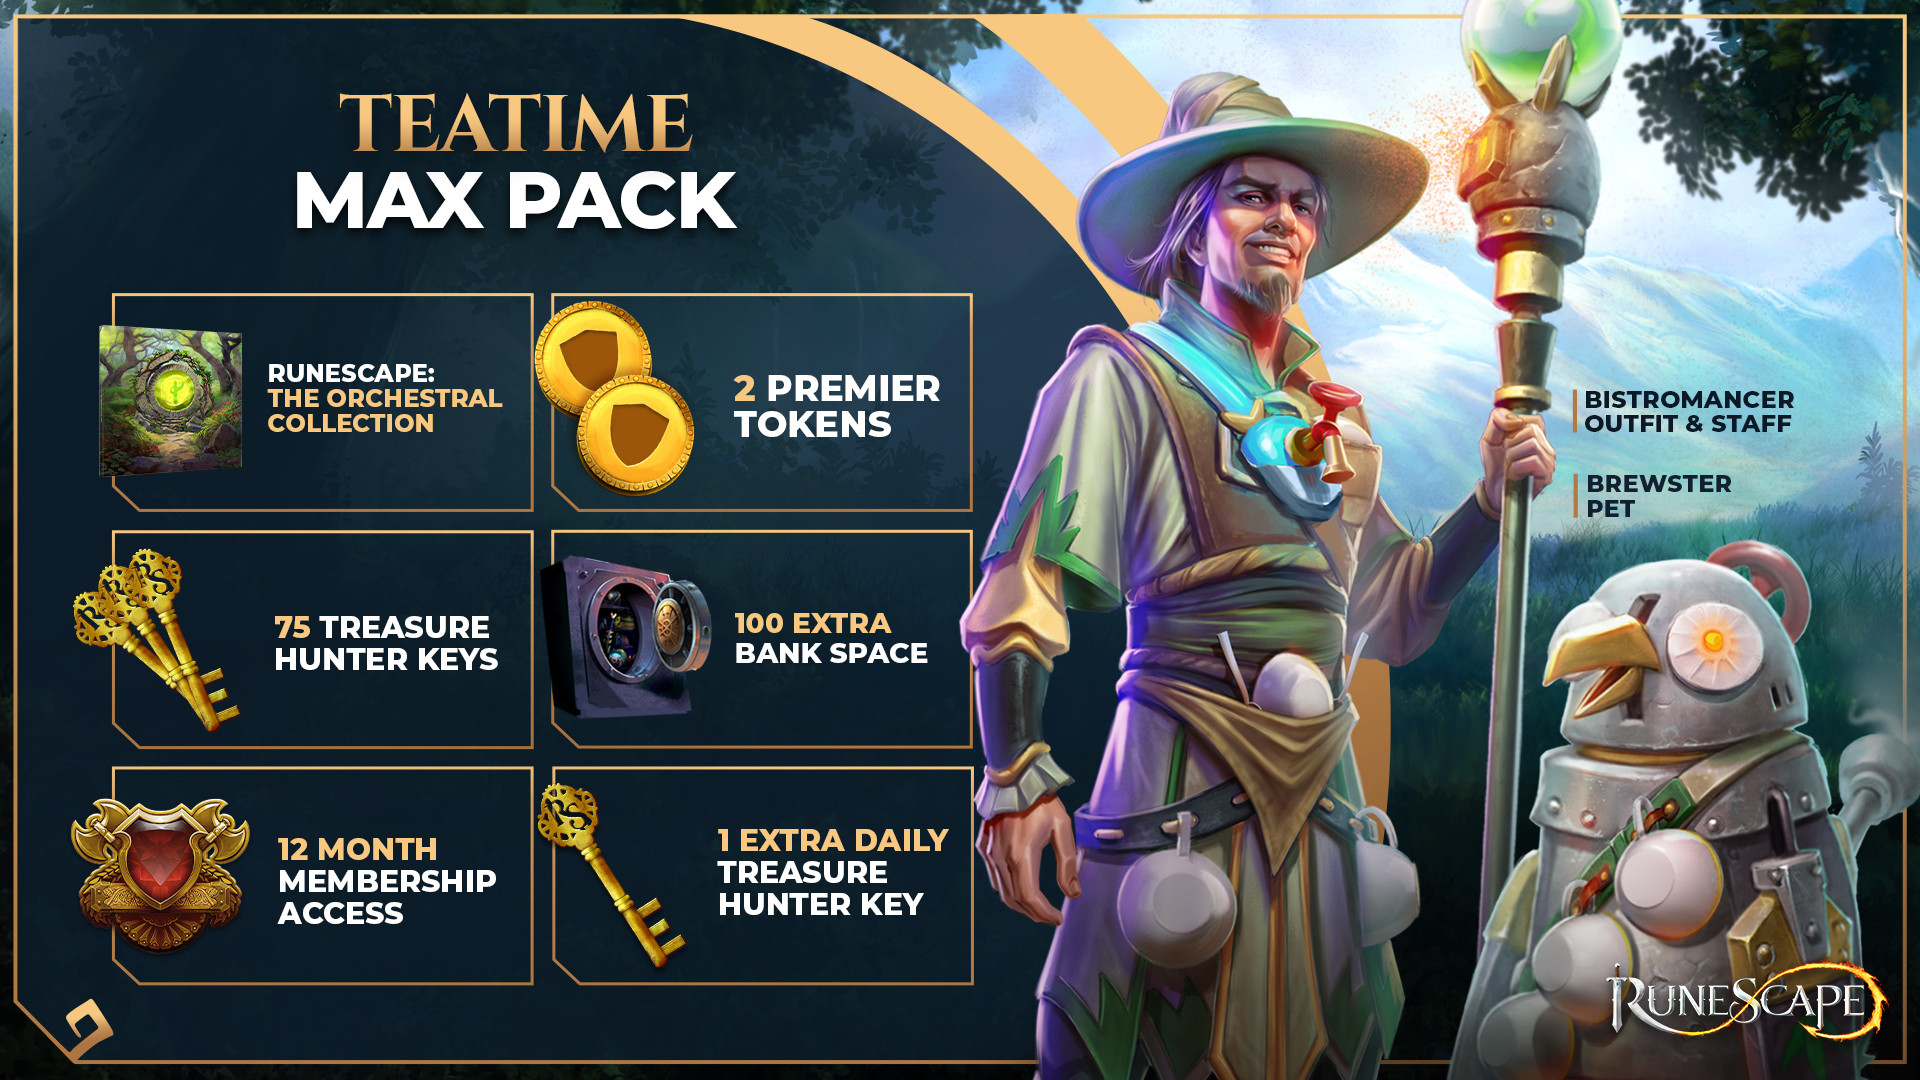 Runescape - Max Pack + 12 Months Membership Manual Delivery, 56.49$